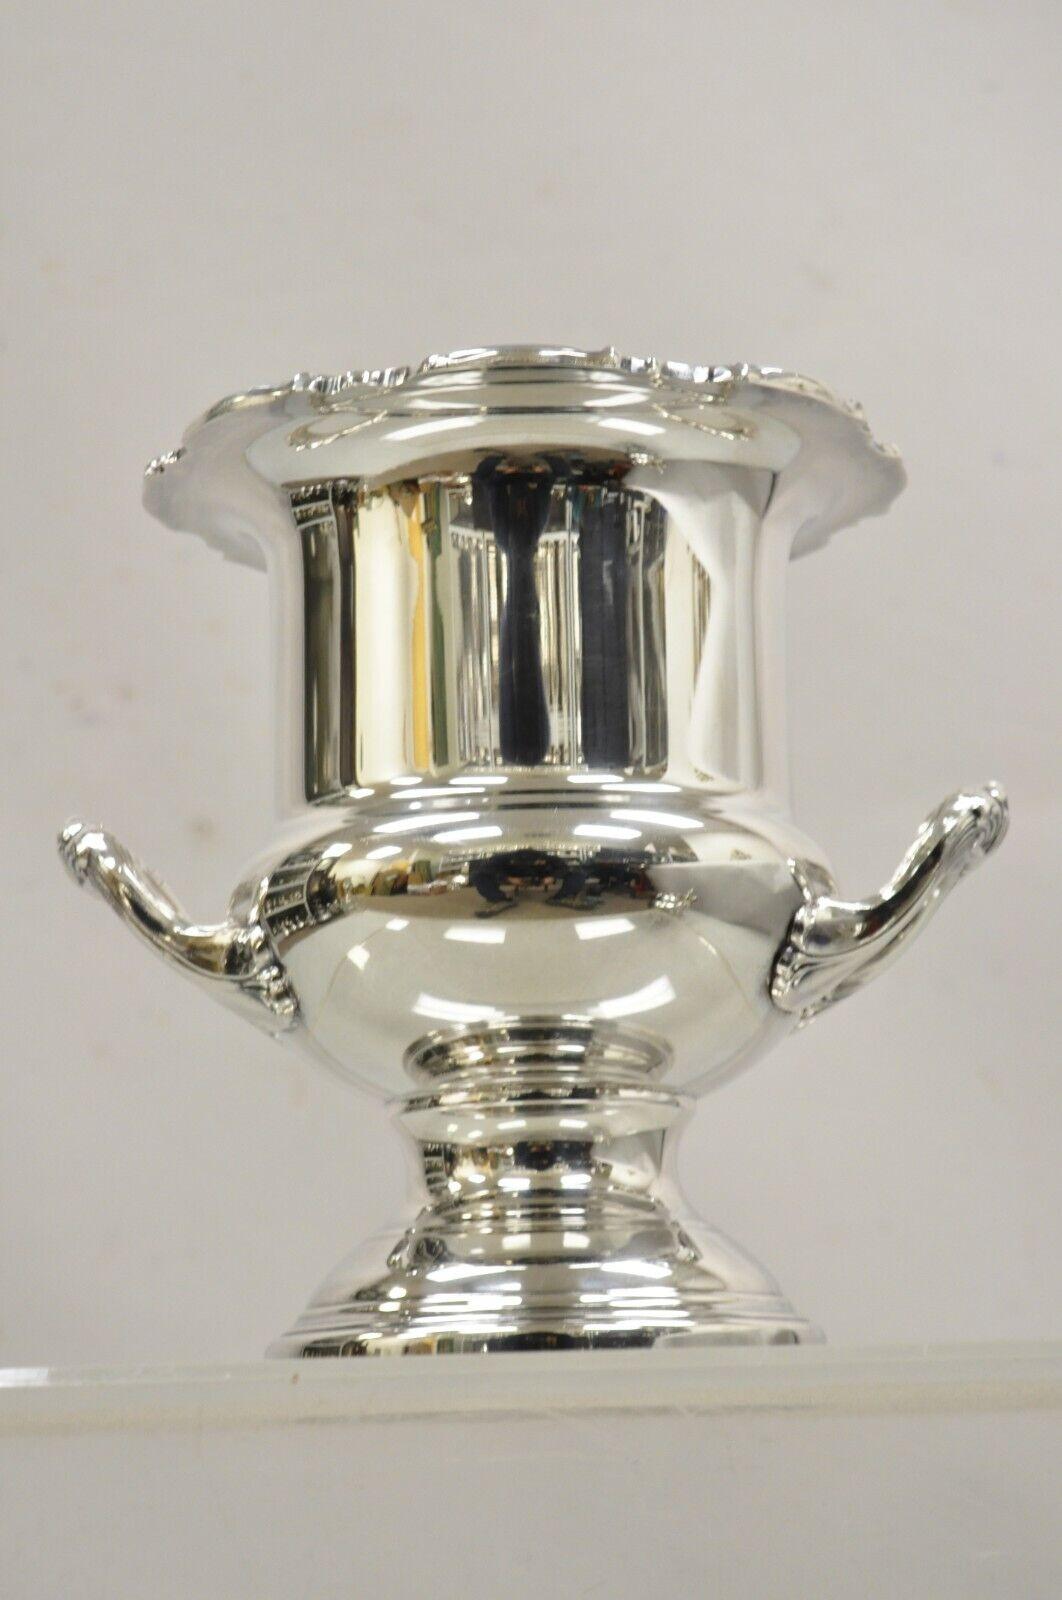 Vintage Victorian Style Trophy Cup Silver Plated Champagne Chiller Ice Bucket. Circa Mid to Late 20th Century. Dimensions : 10